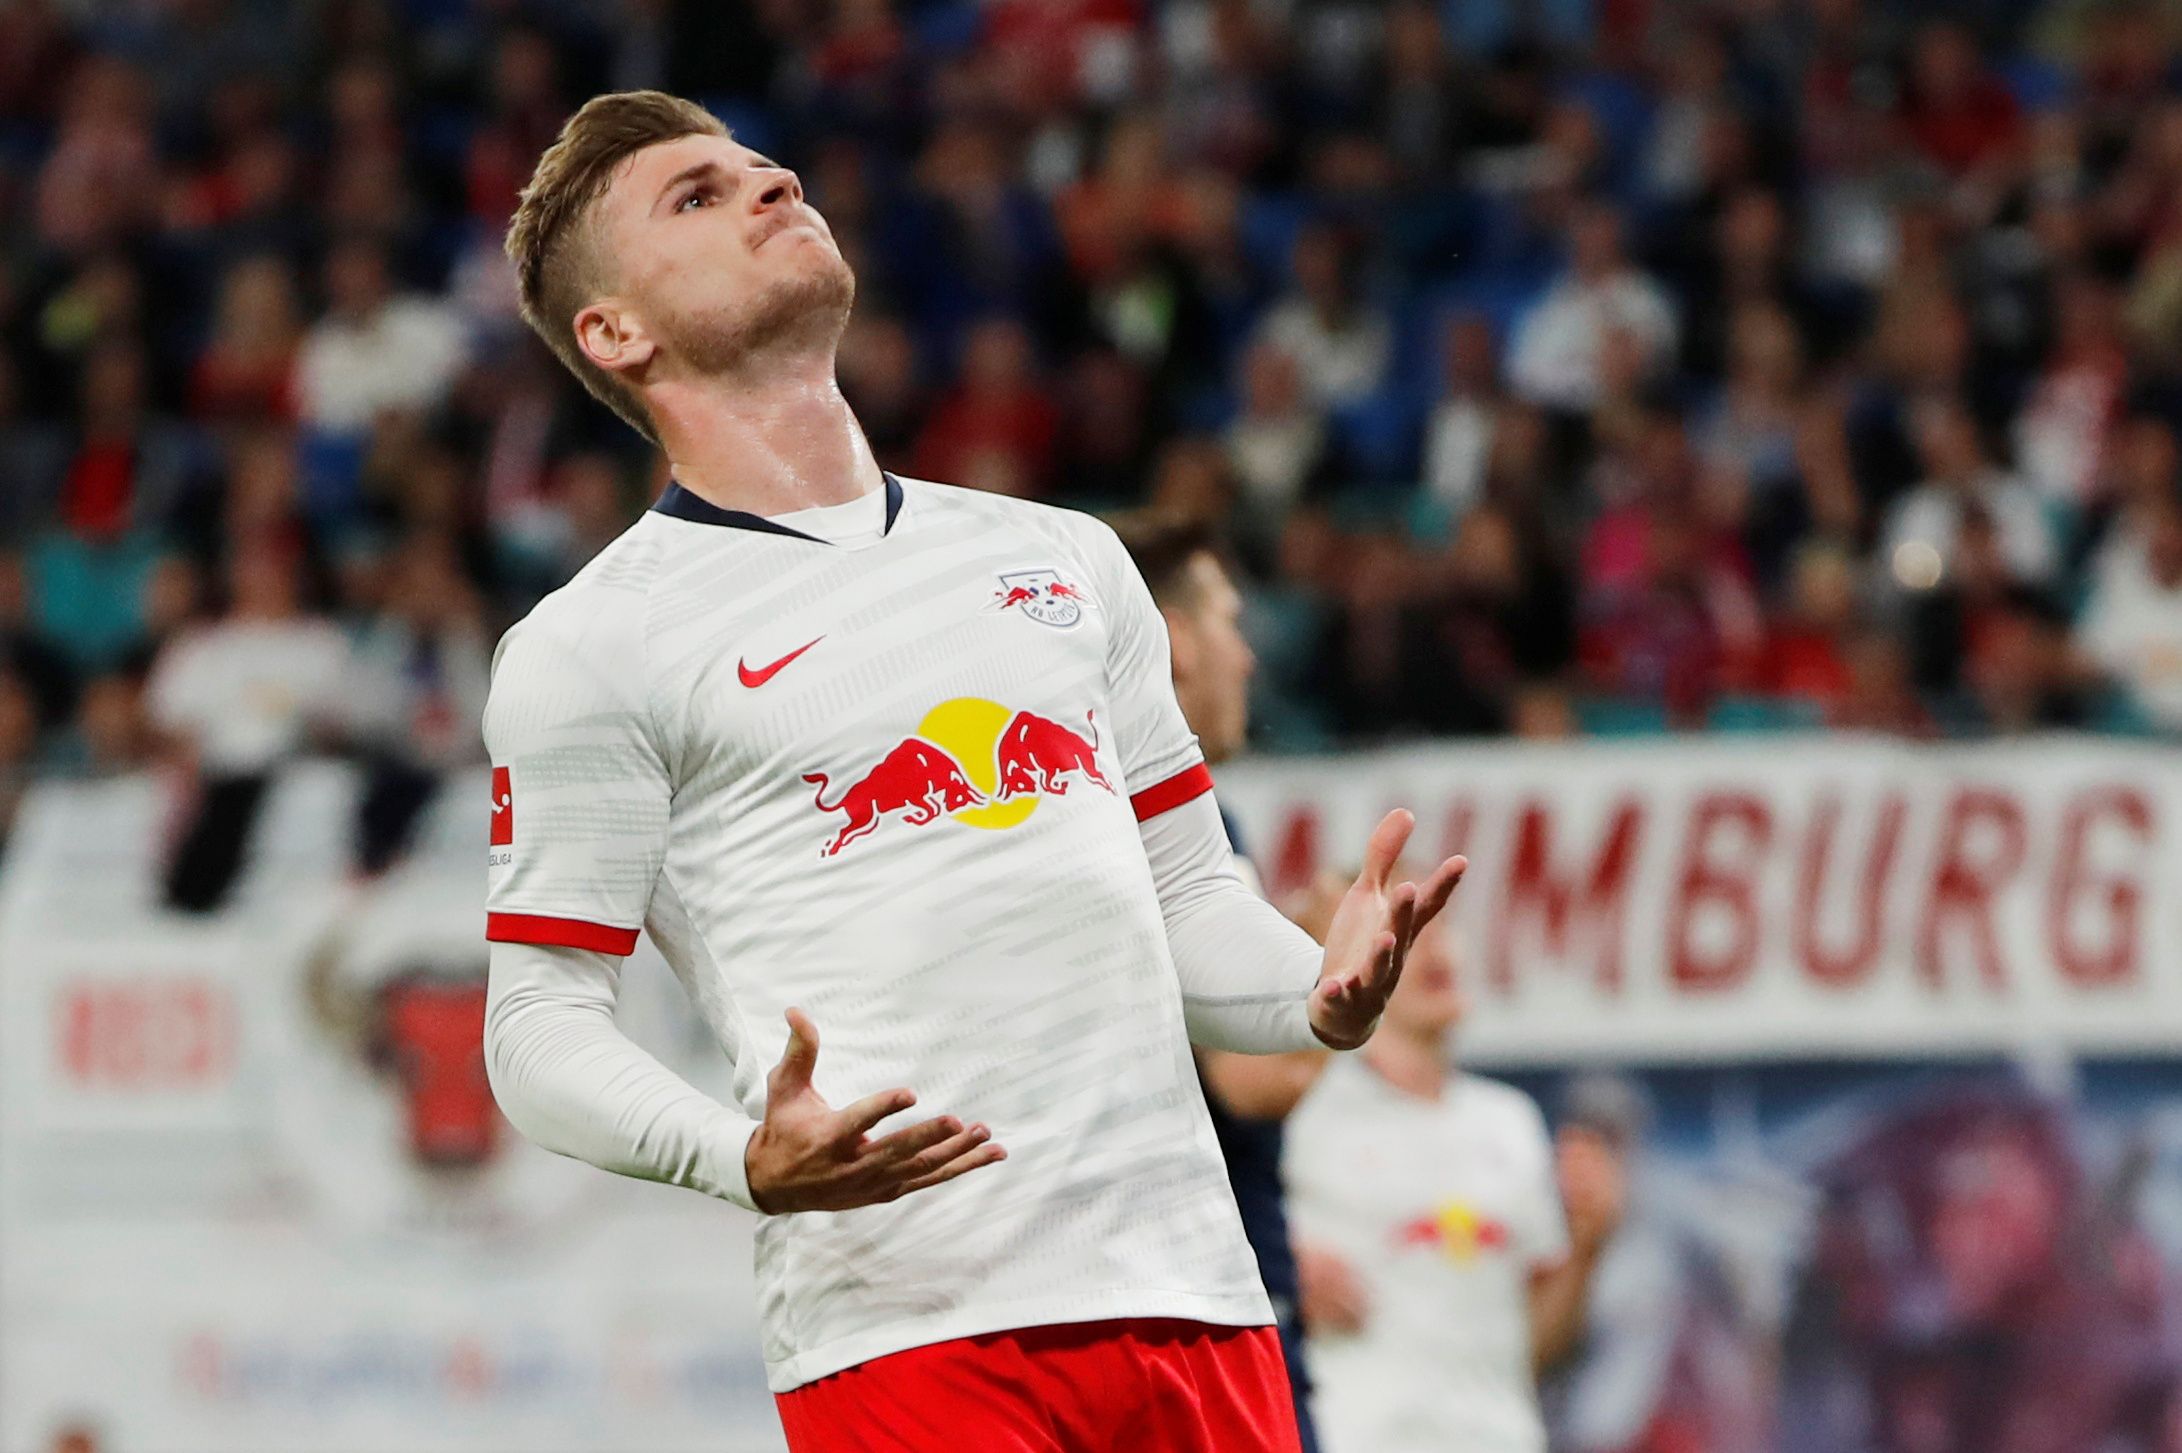 Soccer Football - Bundesliga - RB Leipzig v Bayern Munich - Red Bull Arena, Leipzig, Germany - September 14, 2019  RB Leipzig's Timo Werner reacts after a missed chance  REUTERS/Fabrizio Bensch  DFL regulations prohibit any use of photographs as image sequences and/or quasi-video